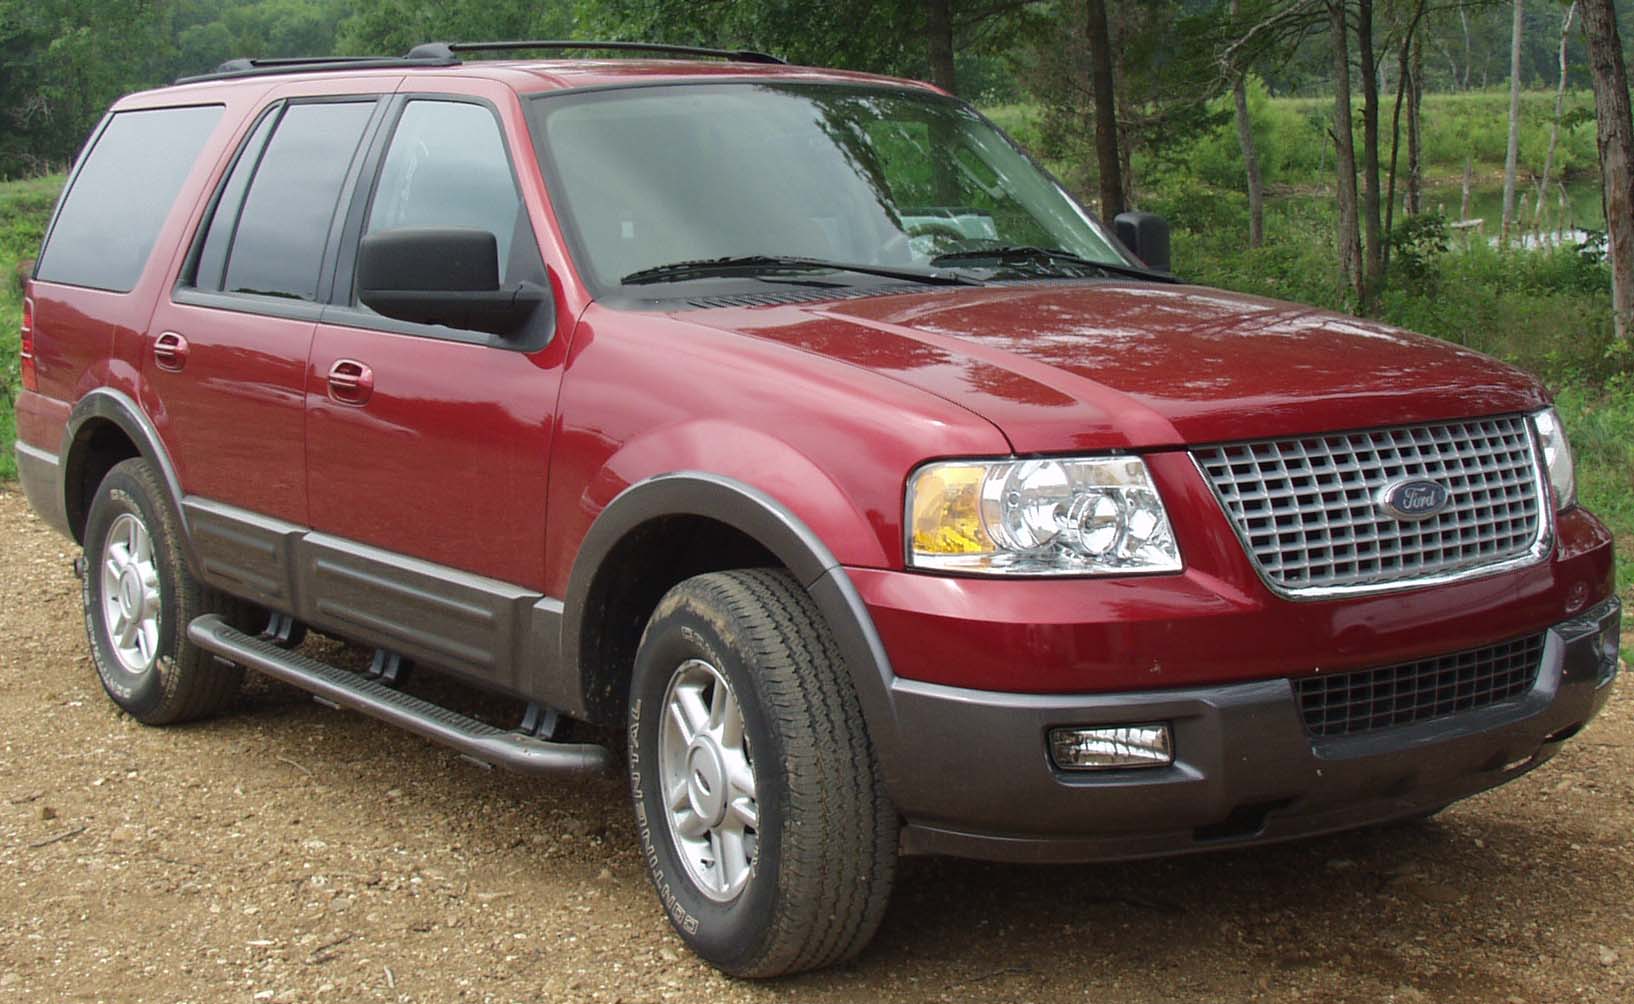 2005 Ford Expedition Transmission Slipping 2005 Ford Expedition Eddie Bauer Towing Capacity